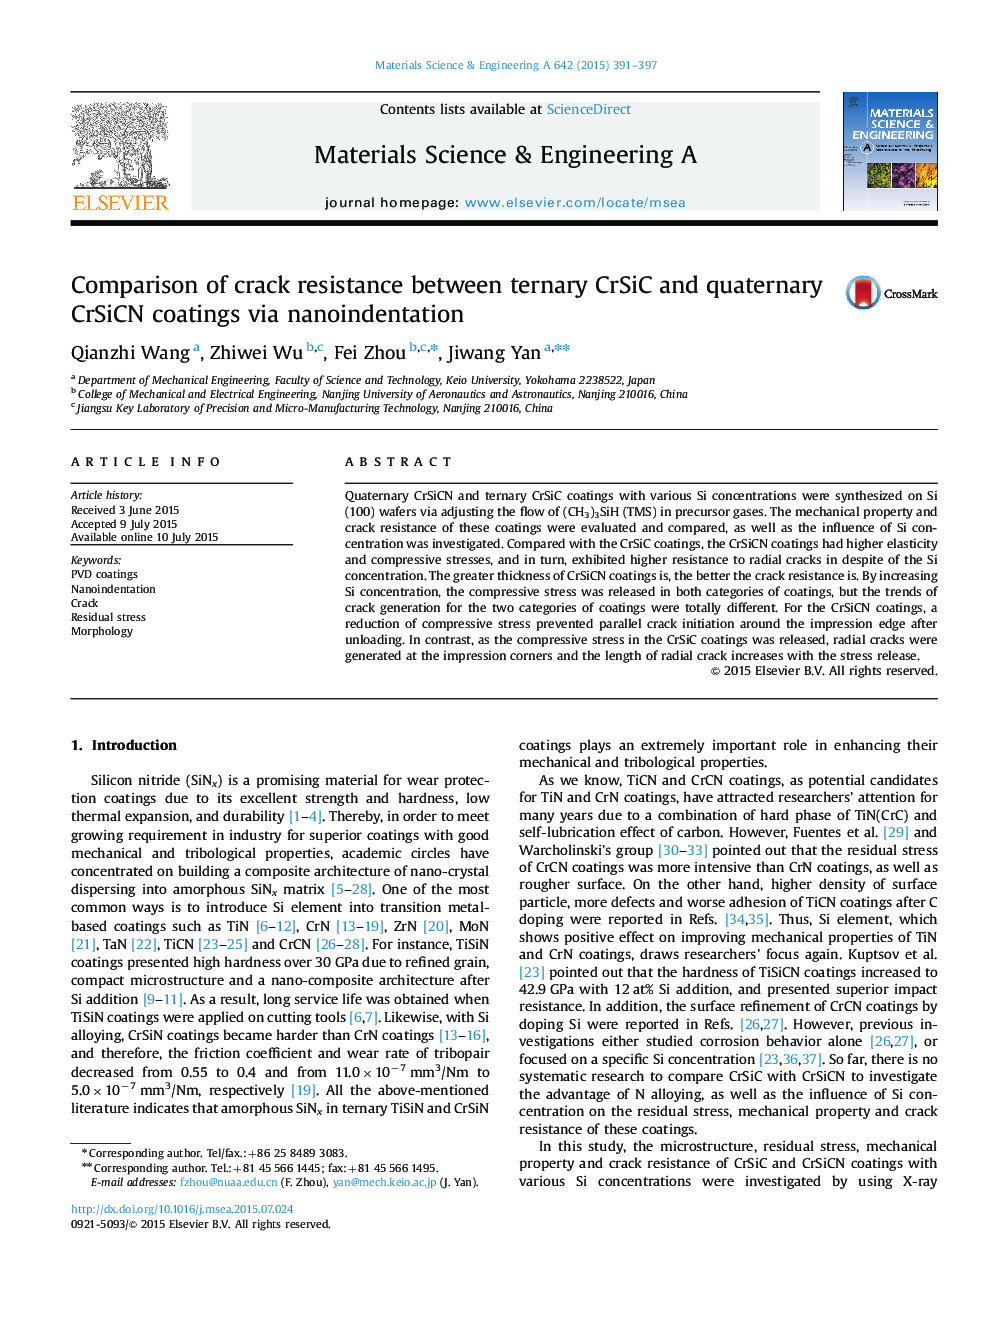 Comparison of crack resistance between ternary CrSiC and quaternary CrSiCN coatings via nanoindentation